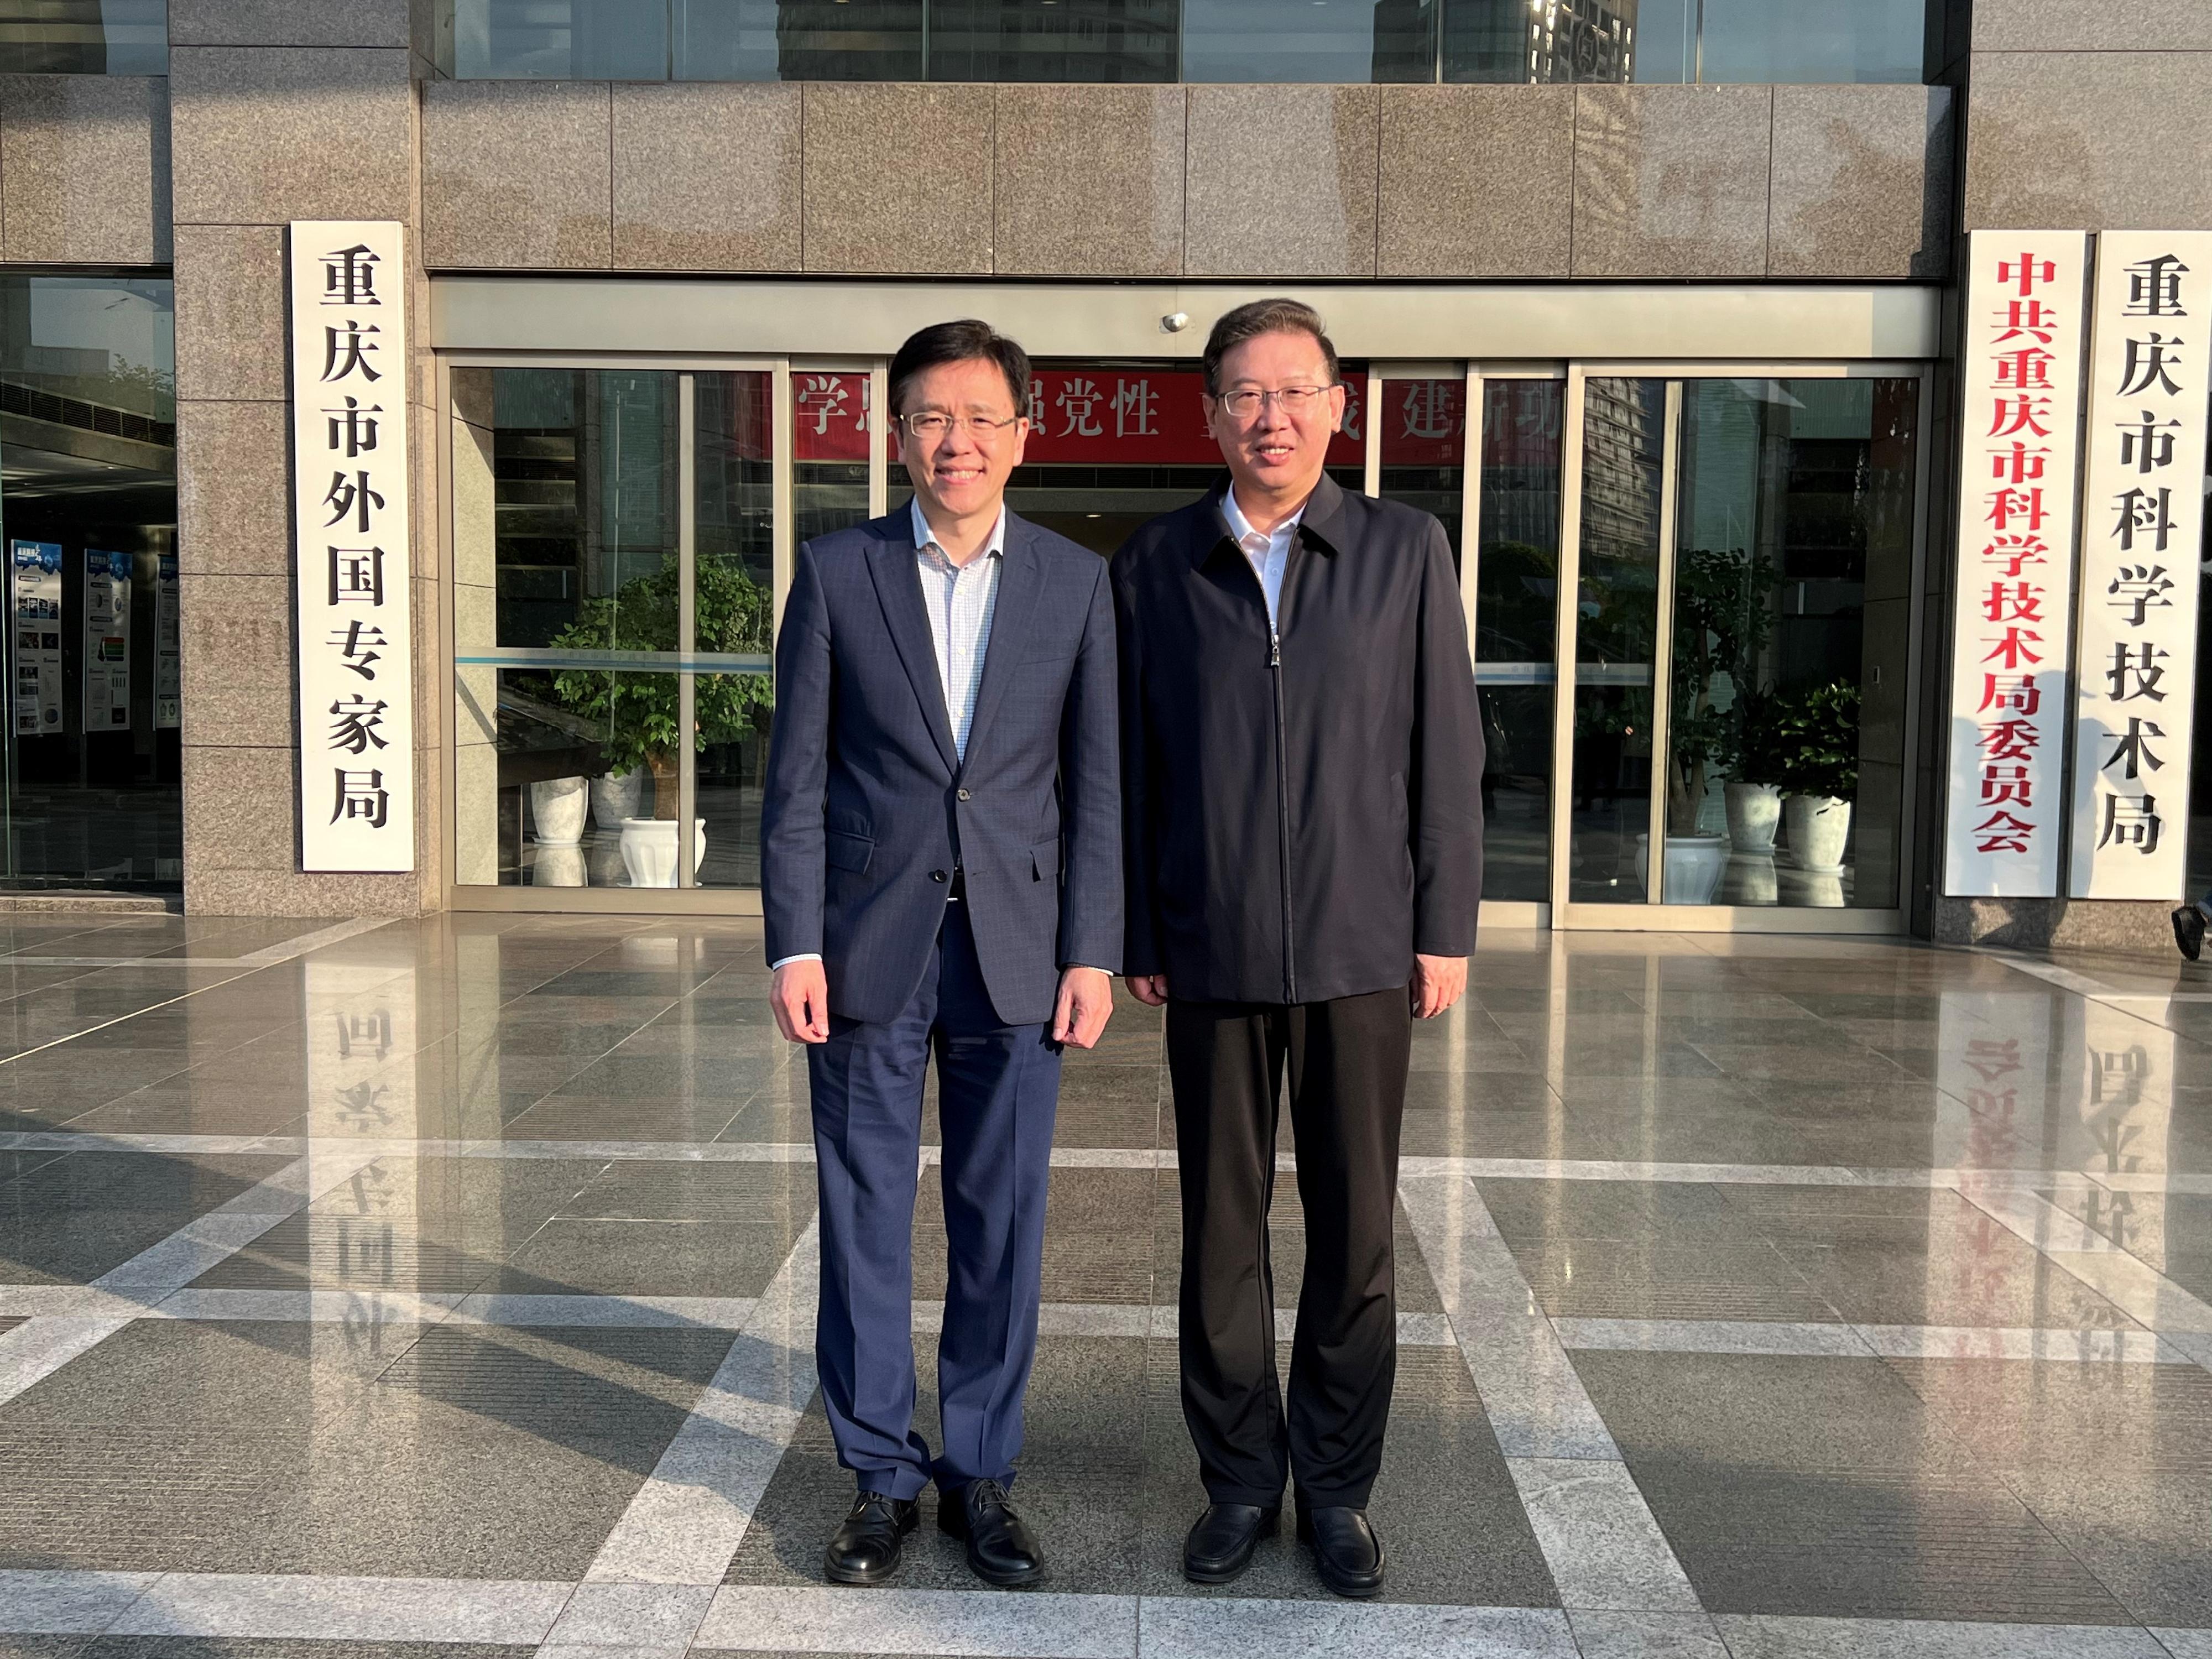 The Secretary for Innovation, Technology and Industry, Professor Sun Dong (left), meets with the Director of the Chongqing Municipal Science and Technology Bureau, Mr Ming Ju (right), in Chongqing today (May 12) to exchange views on fostering co-operation in innovation and technology between Chongqing and Hong Kong, and promoting the implementation of the "Co-operation Memorandum on Innovation and Technology between Hong Kong and Chongqing" in the two places.